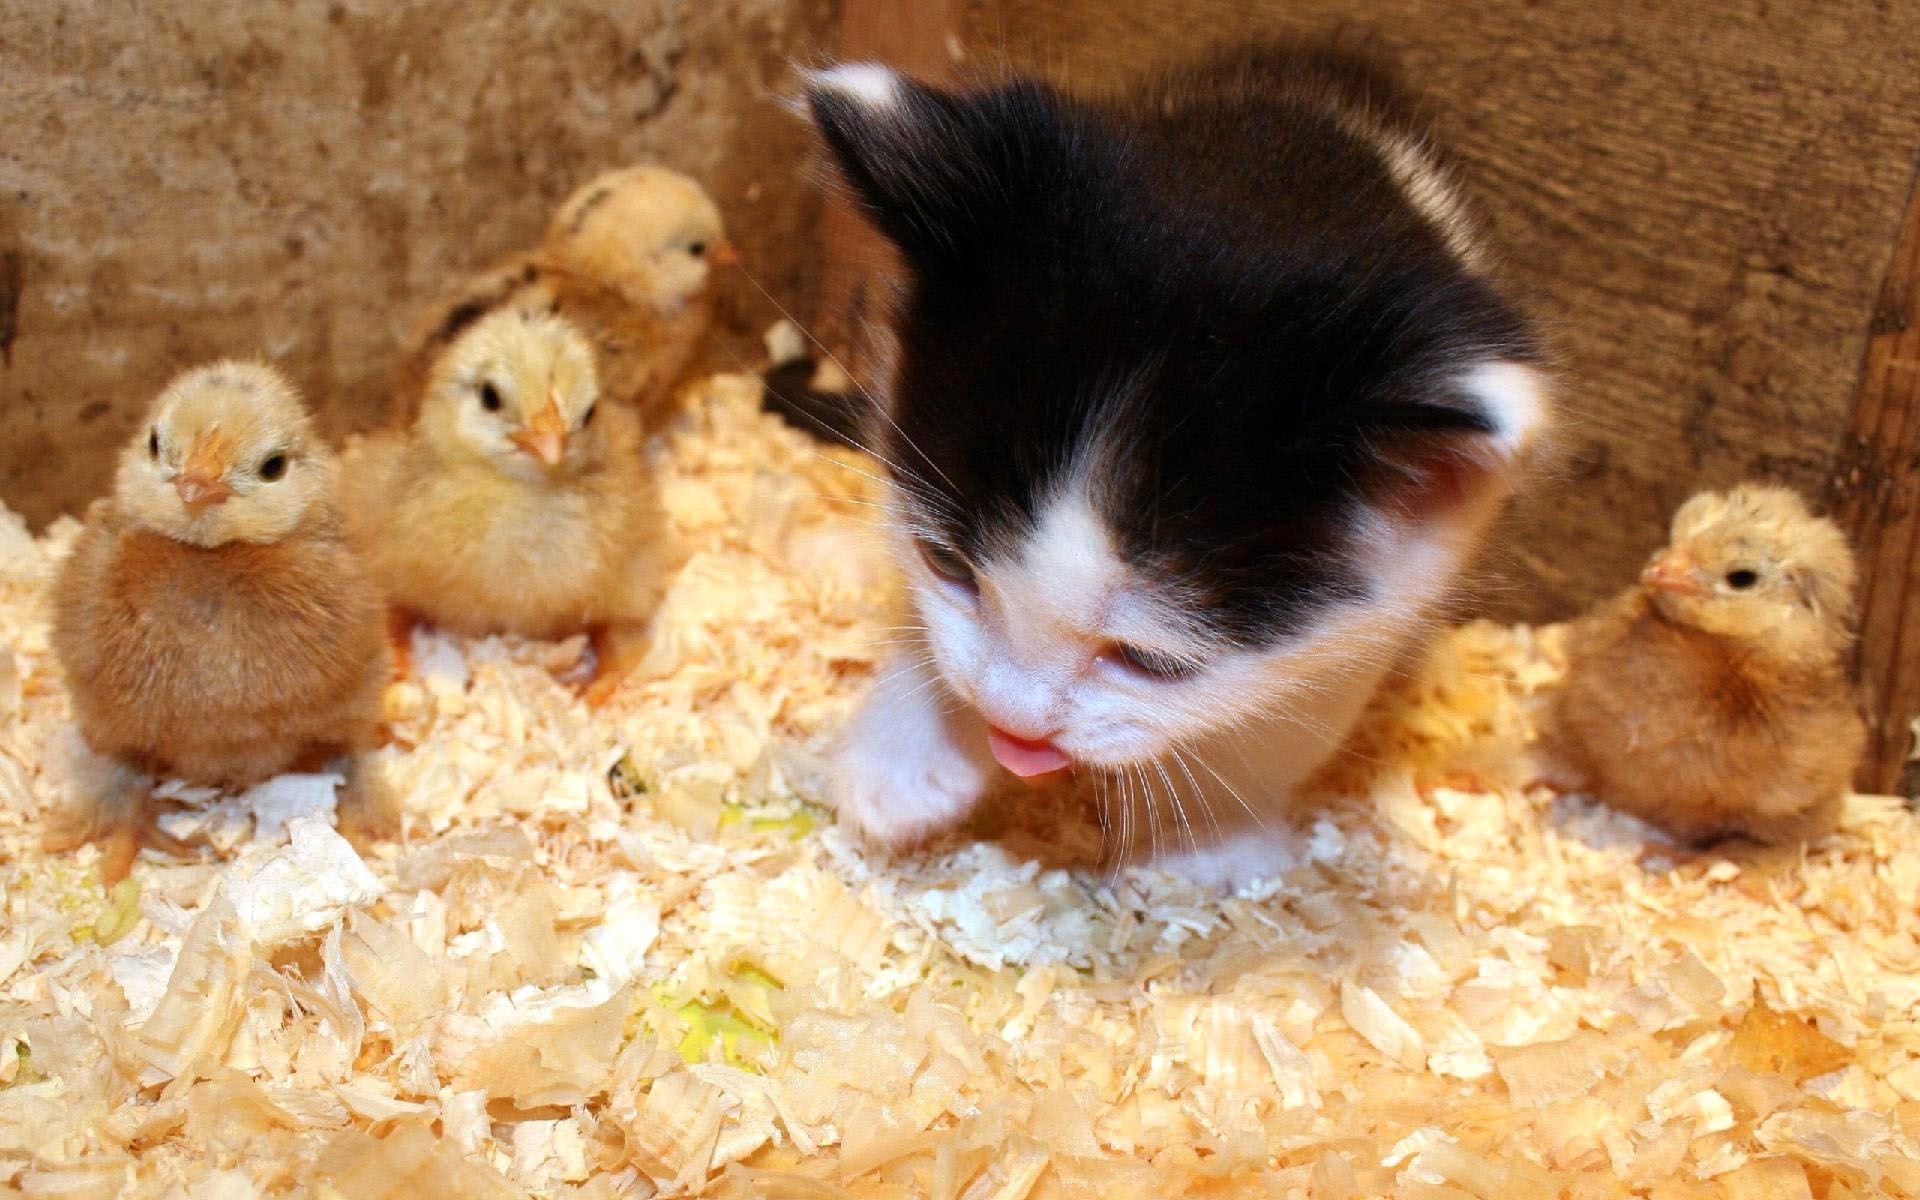 Baby Cat With Baby Ducks. Simply Wallpaper choose and download